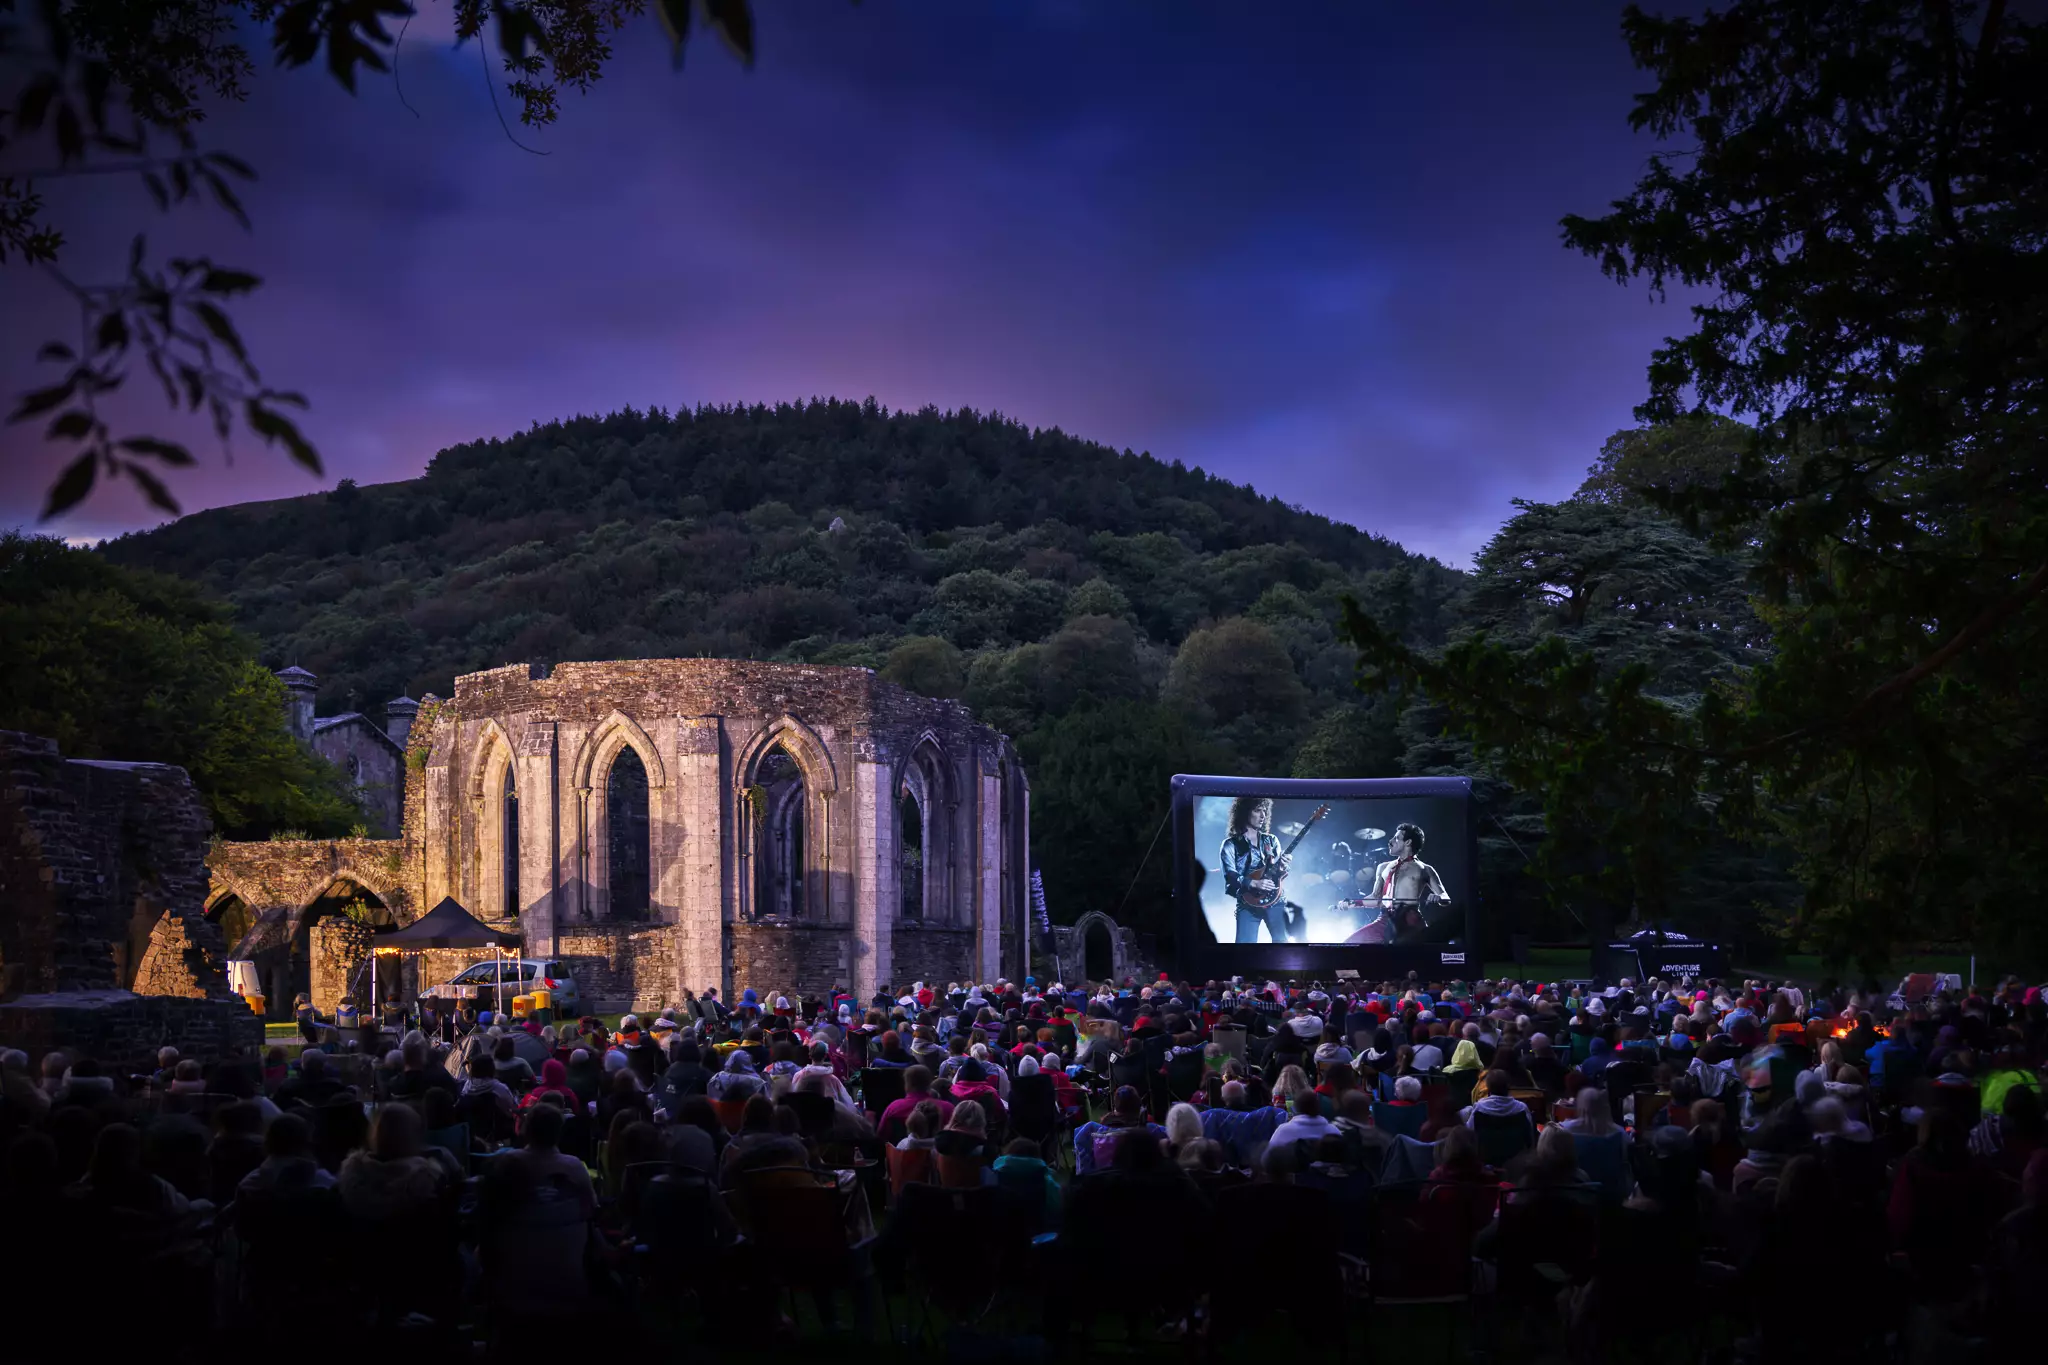 You can watch movies in the most picturesque settings (